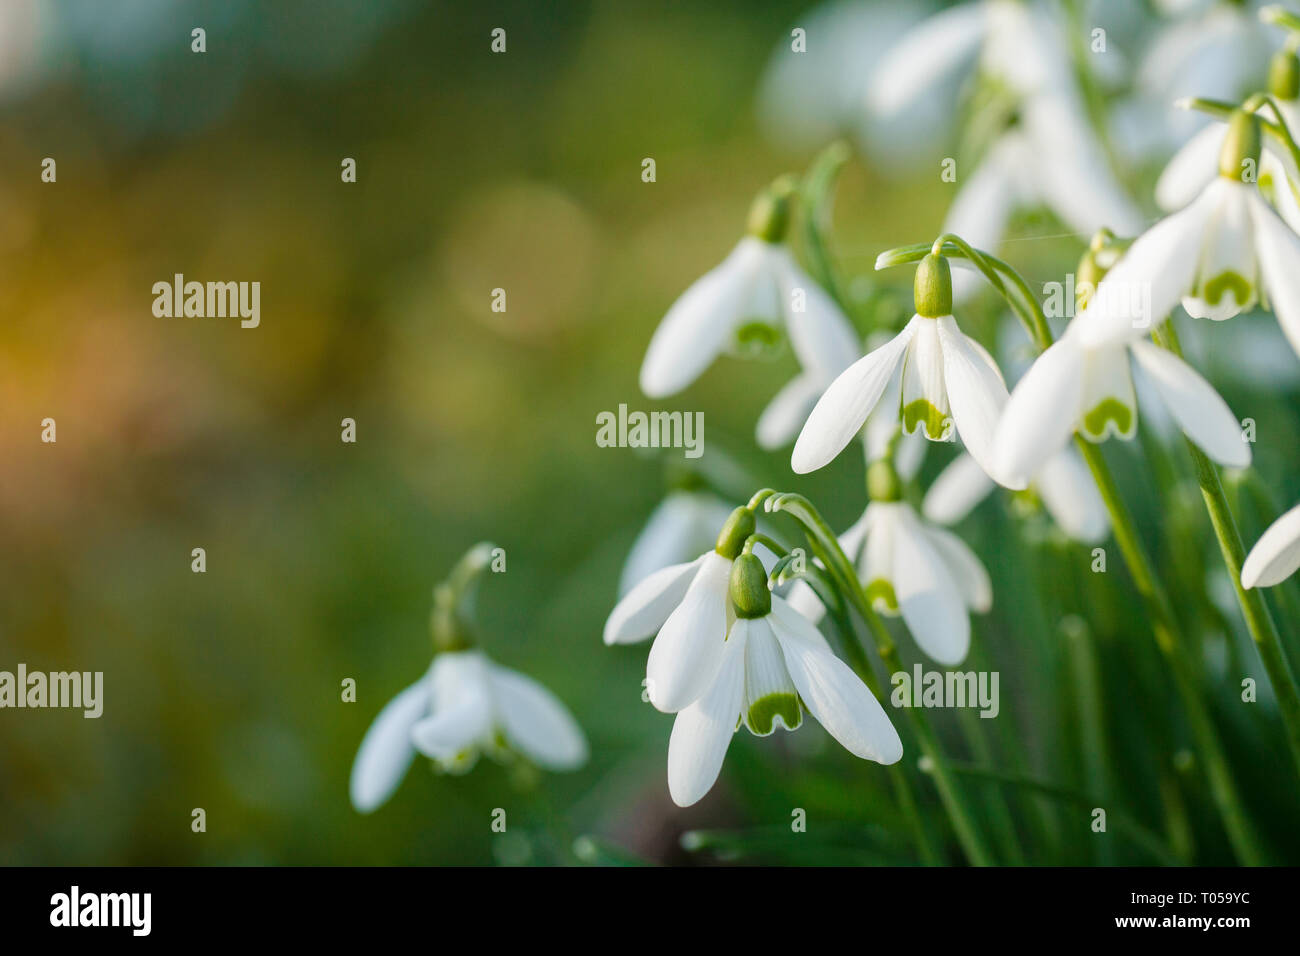 Snowdrop wild flowers group at eye level with blurred bokeh lighting background. Early morning sunlight during spring Stock Photo